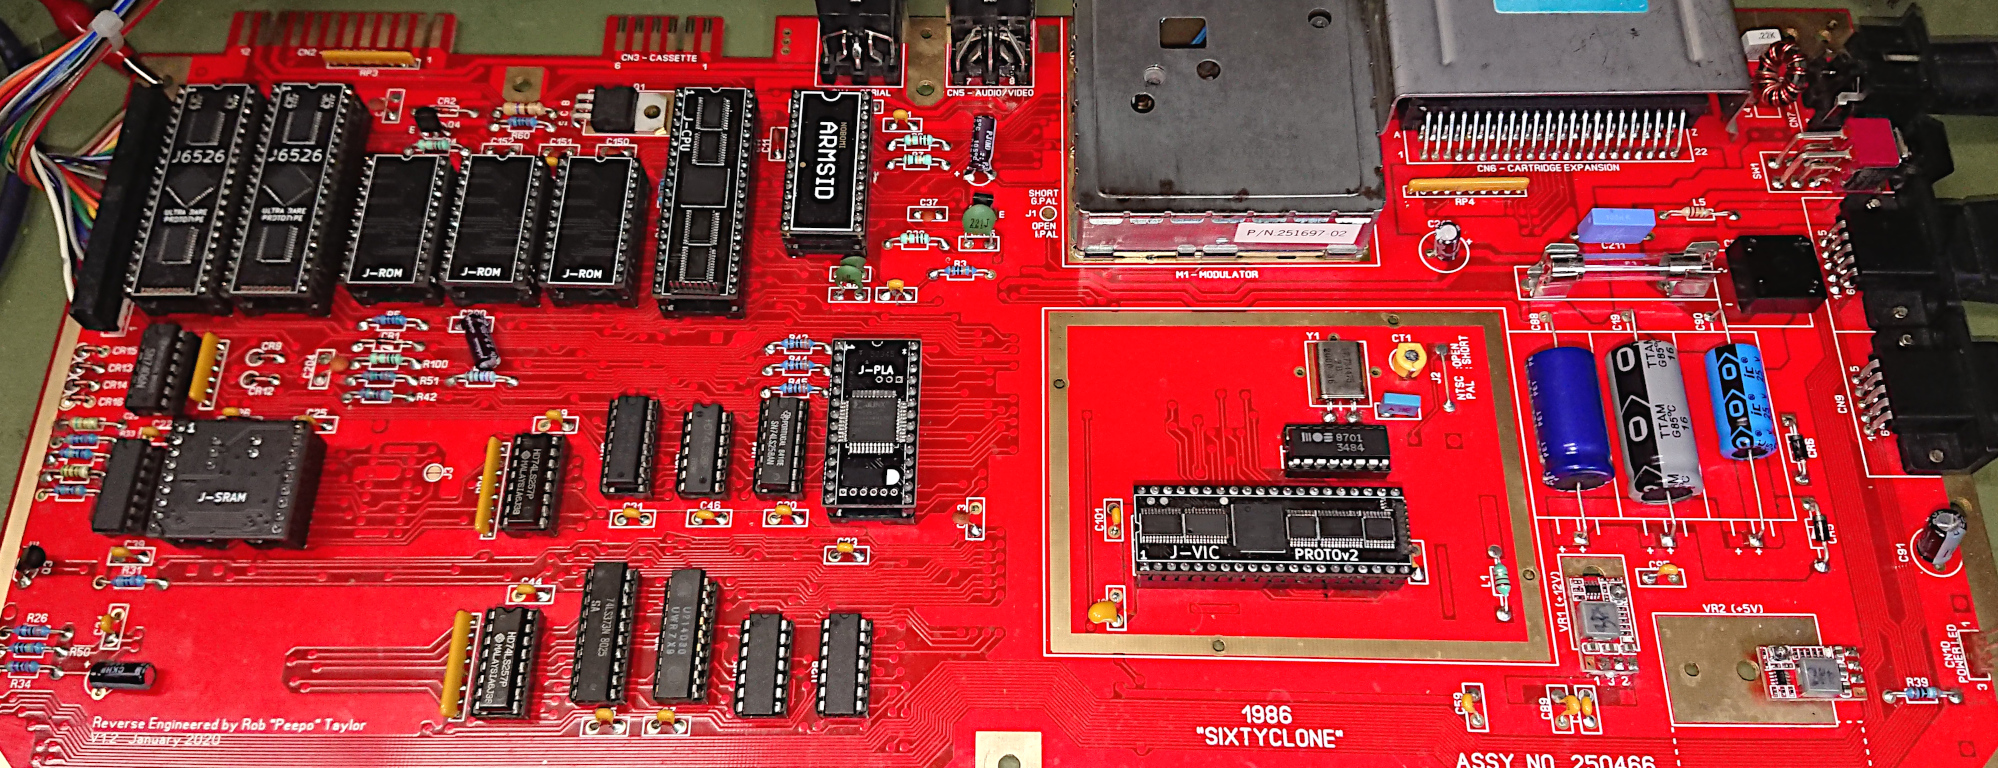 Commodore 64 mainboard with J-CIa, J-CPU and J-VIC